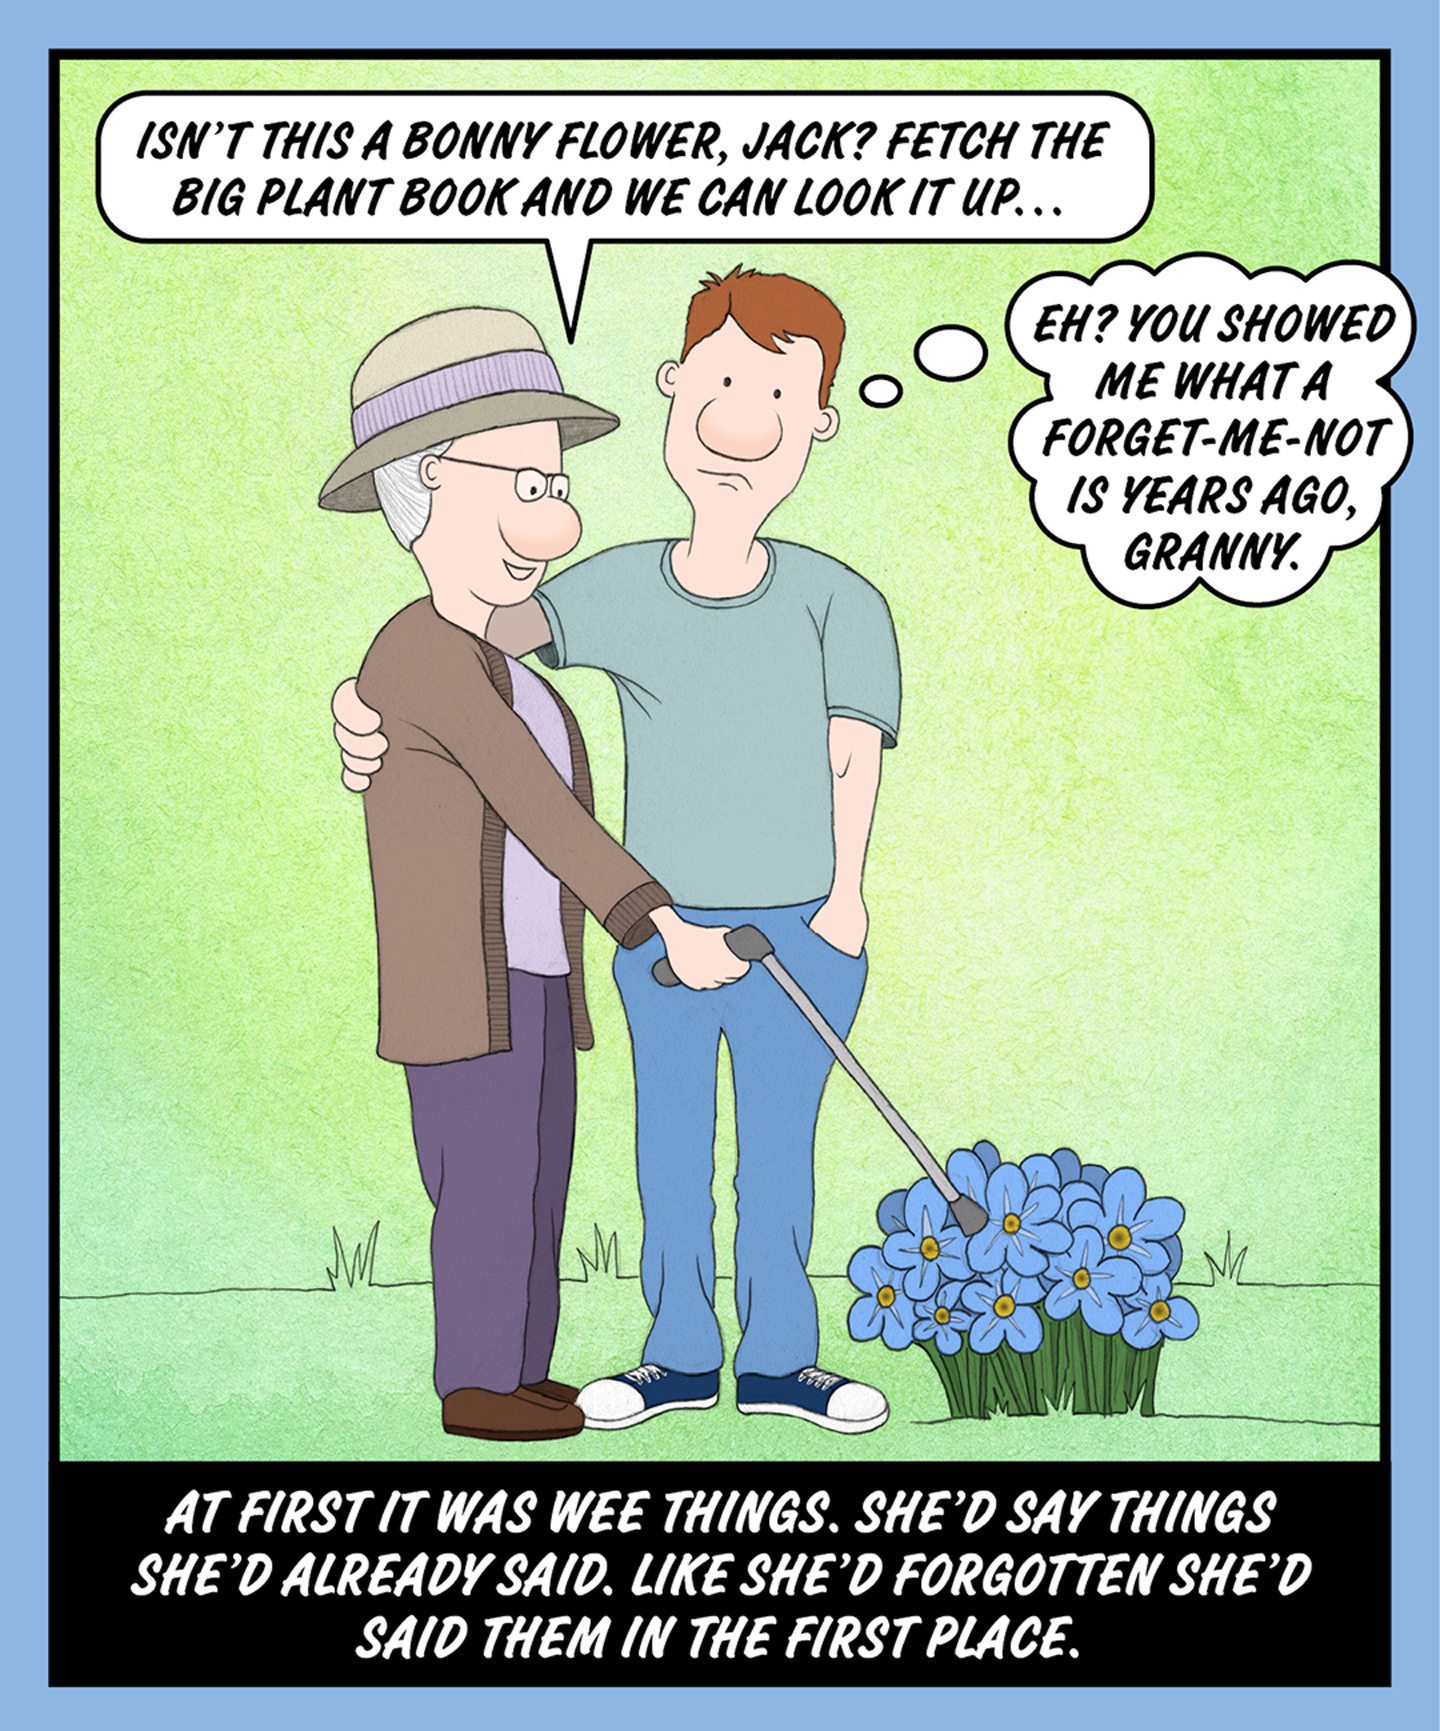 A comic illustration of a young man with his arm around his granny who is pointing at some flowers. The speech bubble from the granny reads: ISN'T THIS A BONNY FLOWER, JACK? FETCH THE BIG PLANT BOOK AND WE CAN LOOK IT UP… The thought bubble from the man reads: EH? YOU SHOWED ME WHAT A FORGET-ME-NOT IS YEARS AGO, GRANNY. The text below the image reads: AT FIRST IT WAS WEE THINGS. SHE'D SAY THINGS SHE'D ALREADY SAID. LIKE SHE'D FORGOTTEN SHE'D SAID THEM IN THE FIRST PLACE.